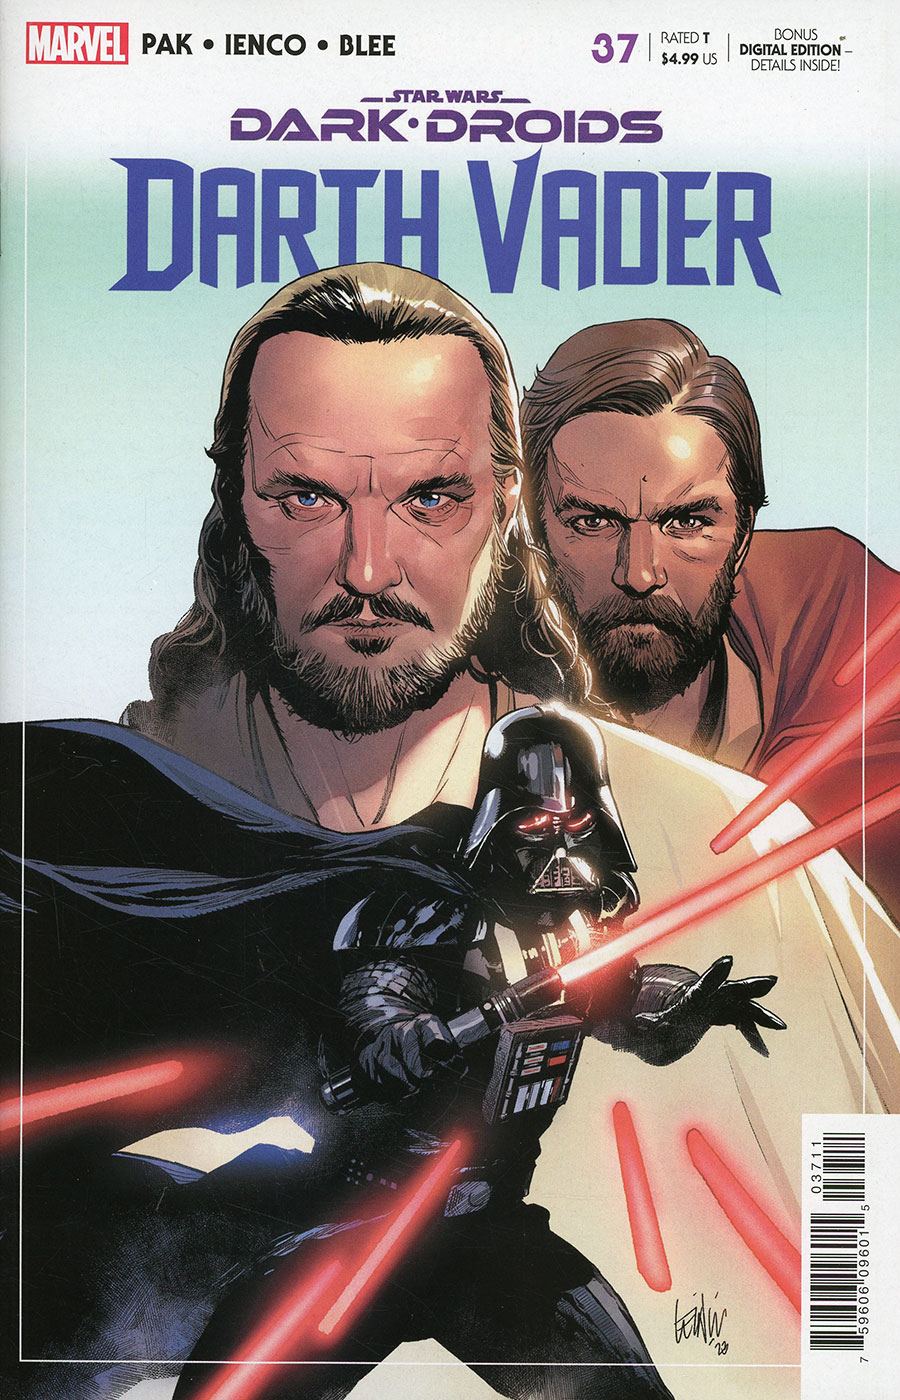 Star Wars Darth Vader #37 Cover A Regular Leinil Francis Yu Cover (Dark Droids Tie-In)